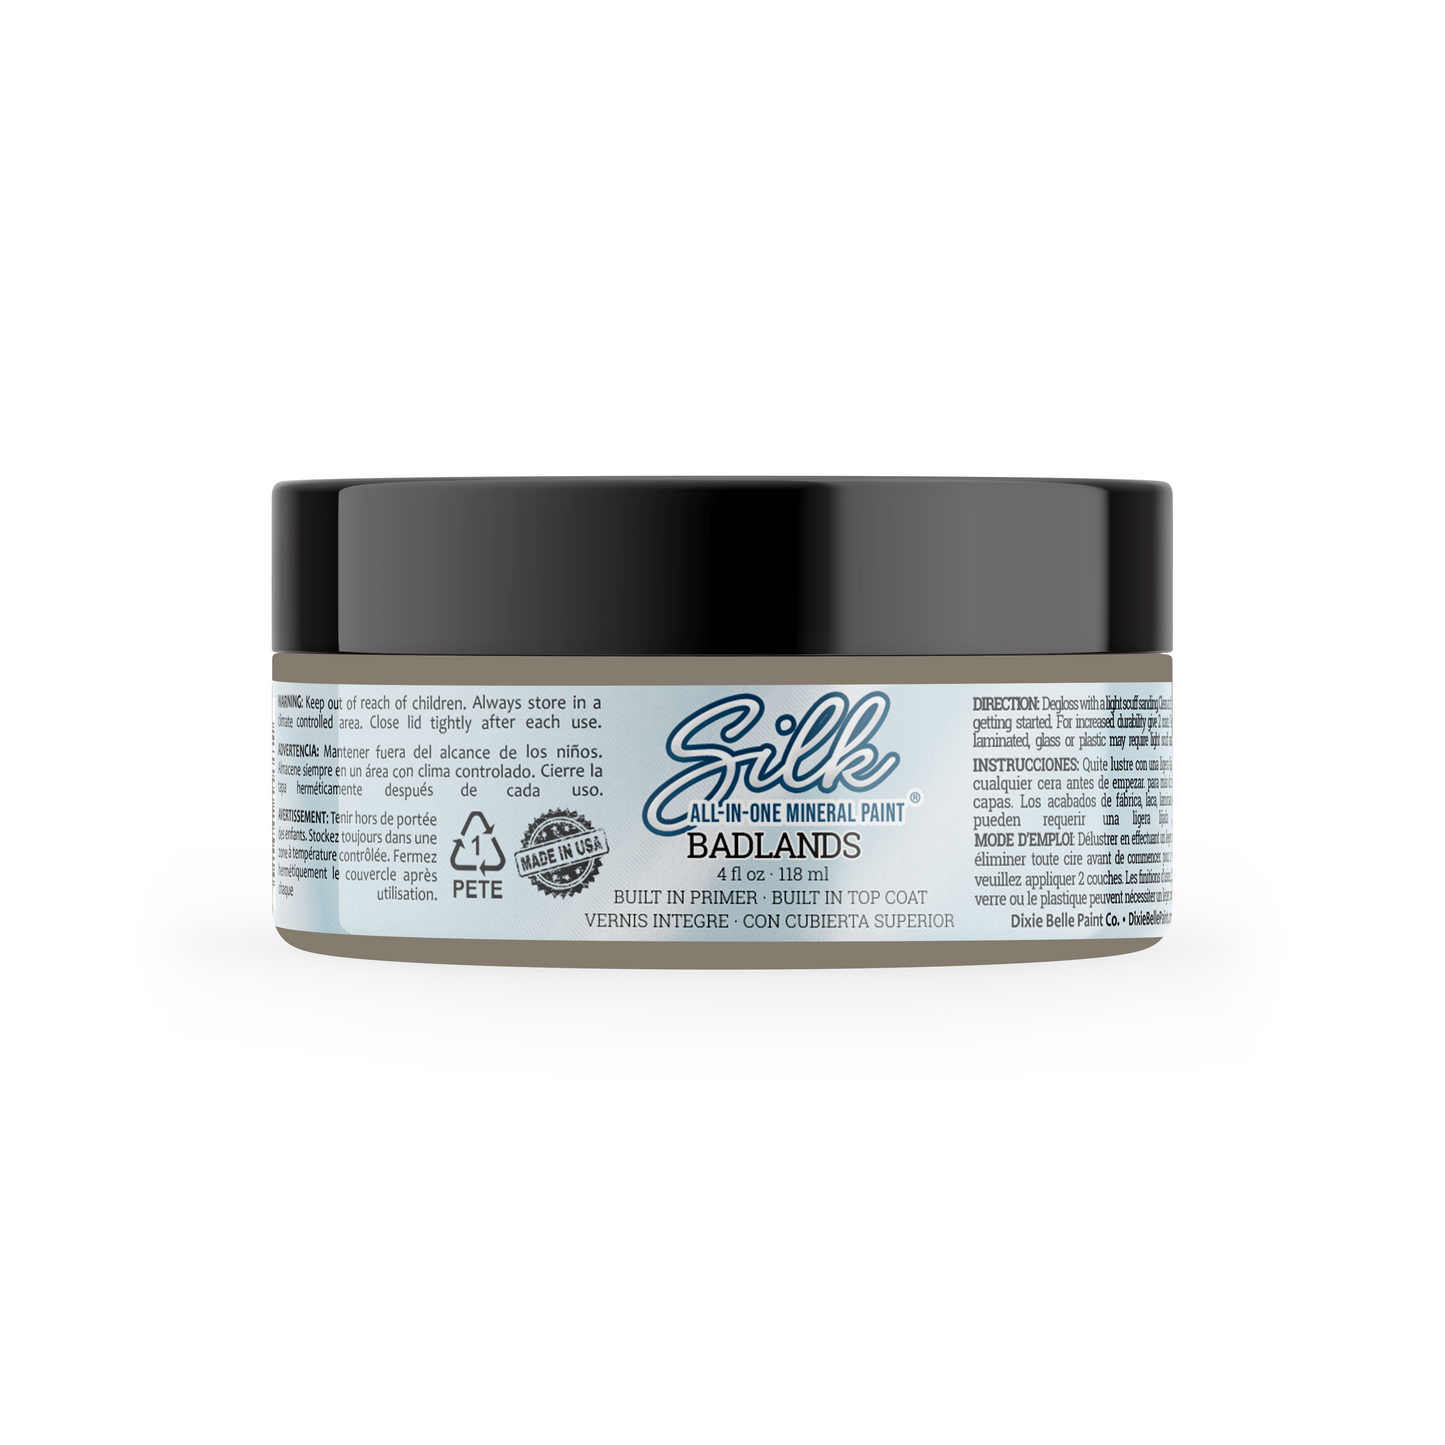 Badlands Silk All-in-One Mineral Paint